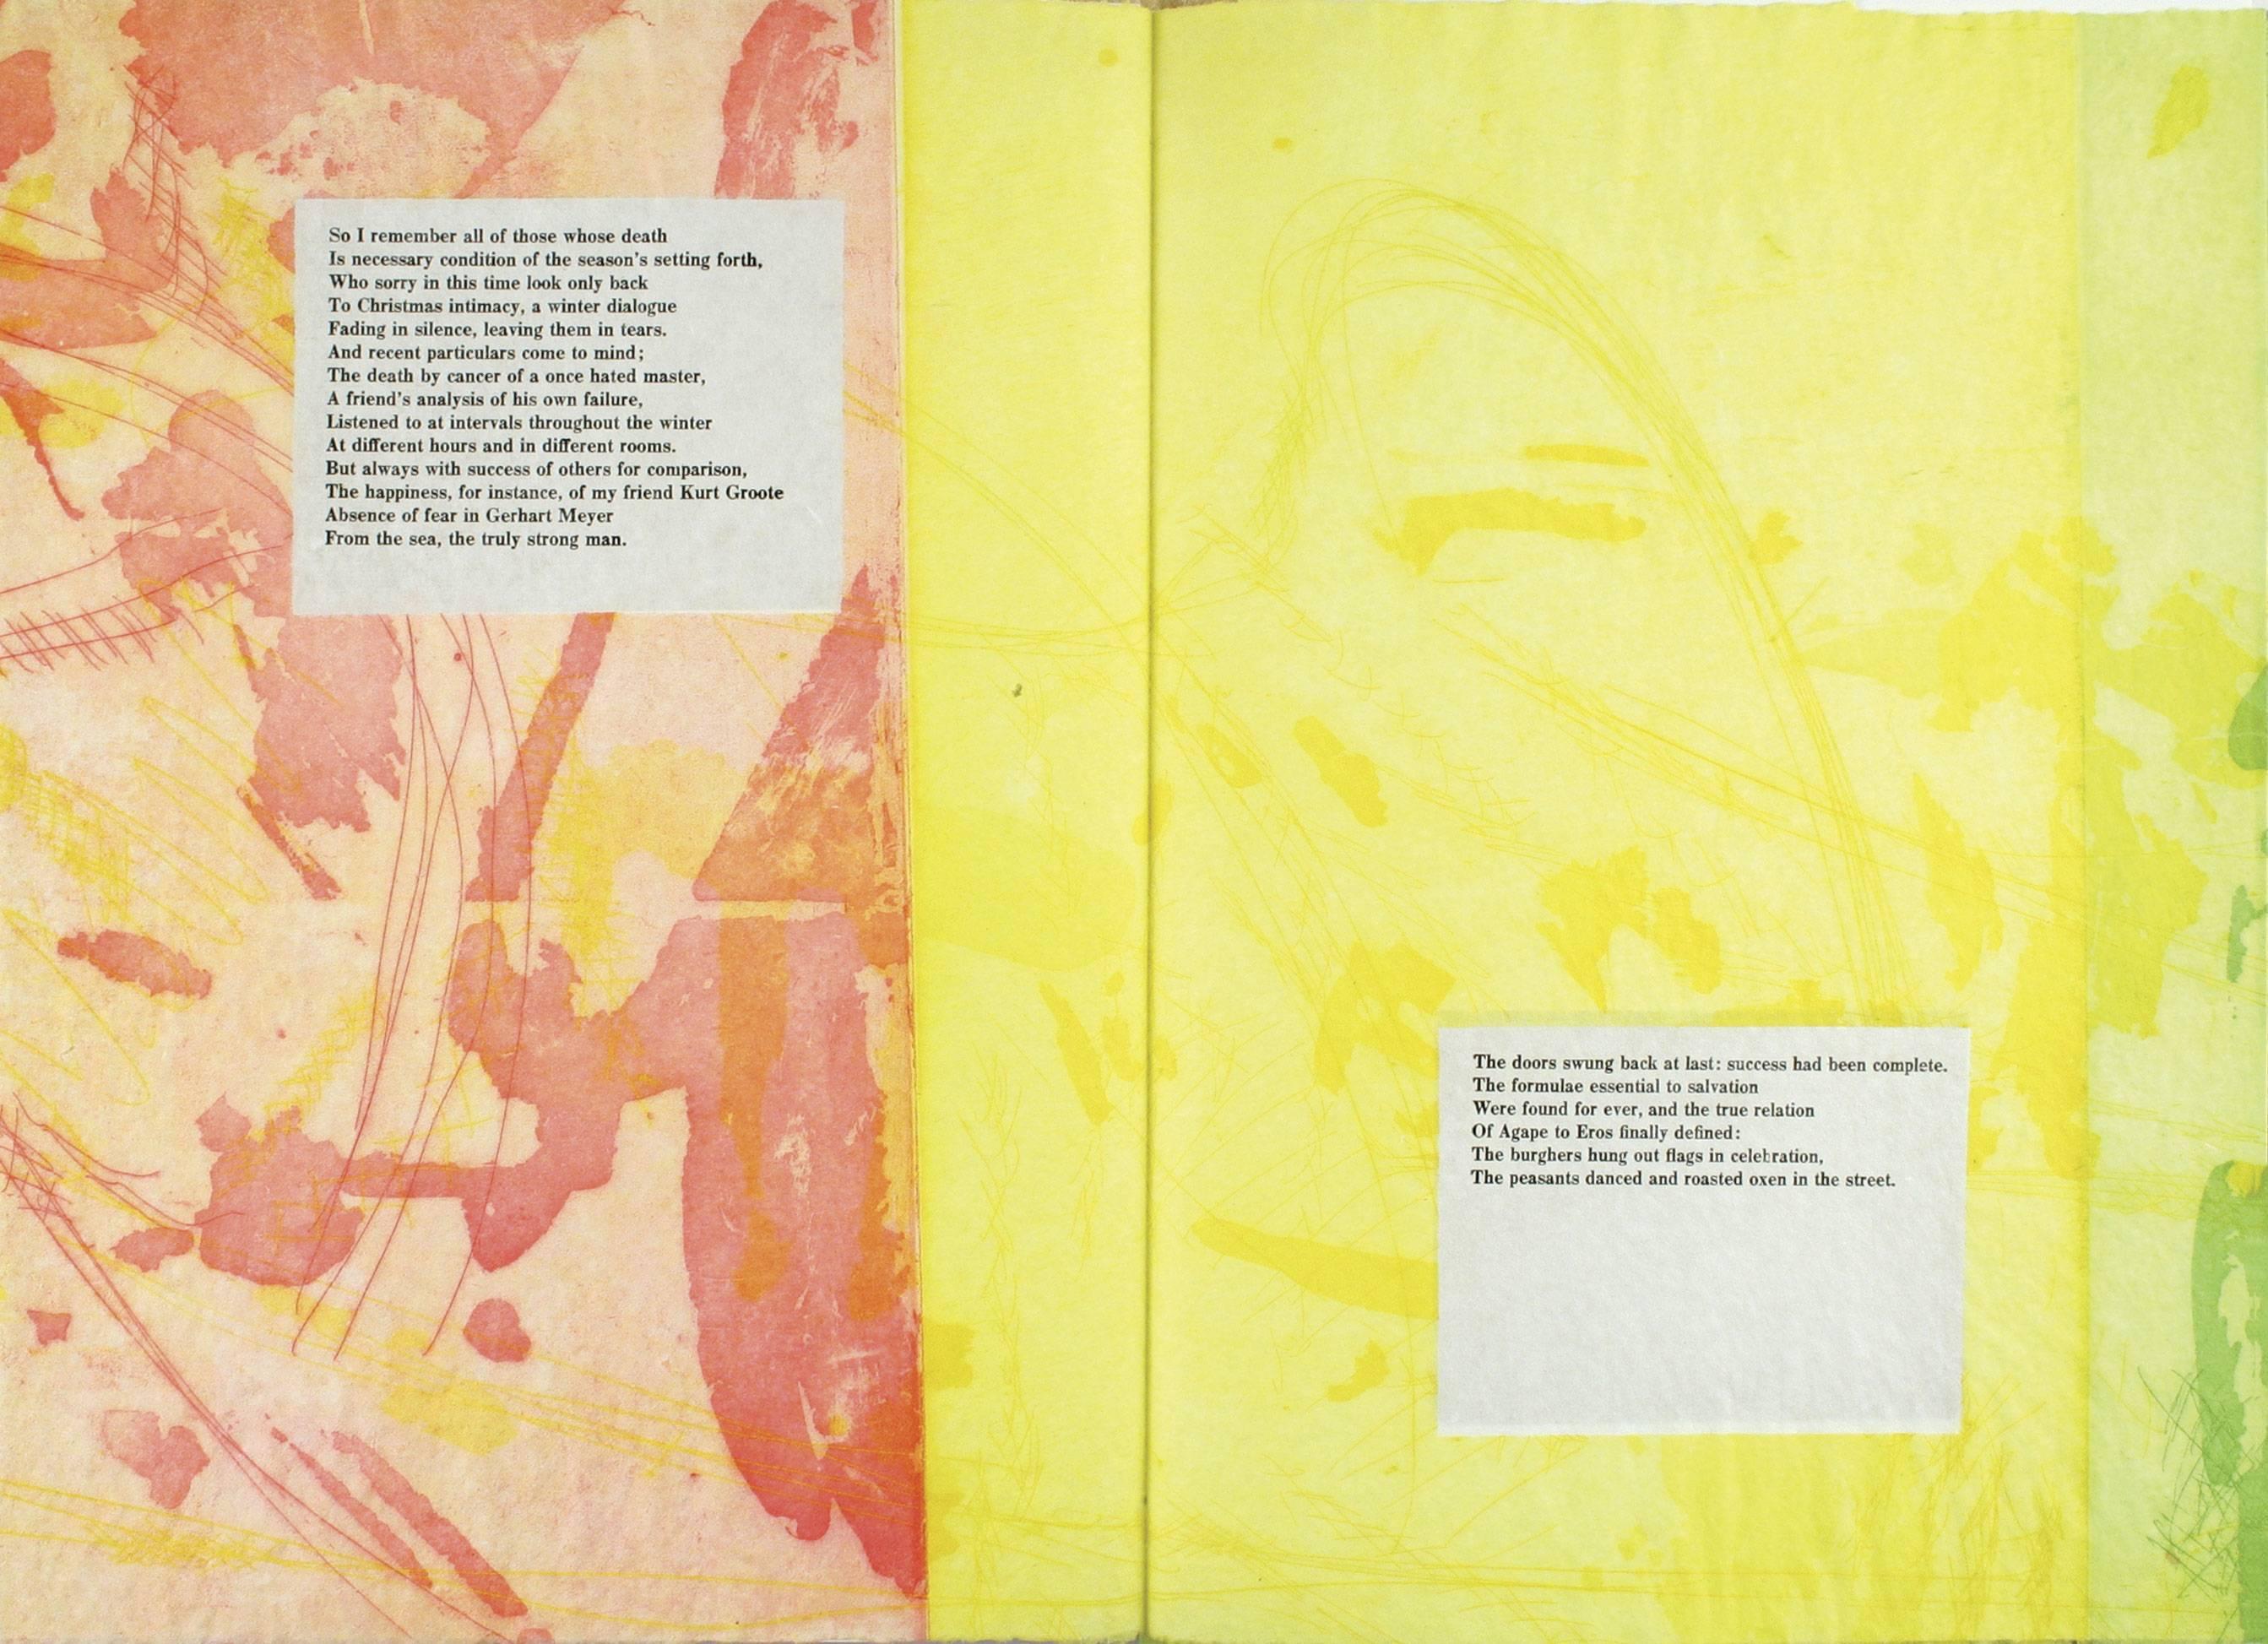 TUTTLE, Richard. Early Auden. By W.H. Auden. Illustrated title-page and 10 accordion-folded panels of translucent paper wrapped around white bristol paper containing colour aquatints by Richard Tuttle. Folio, 350 x 215 mm, bound in smooth white